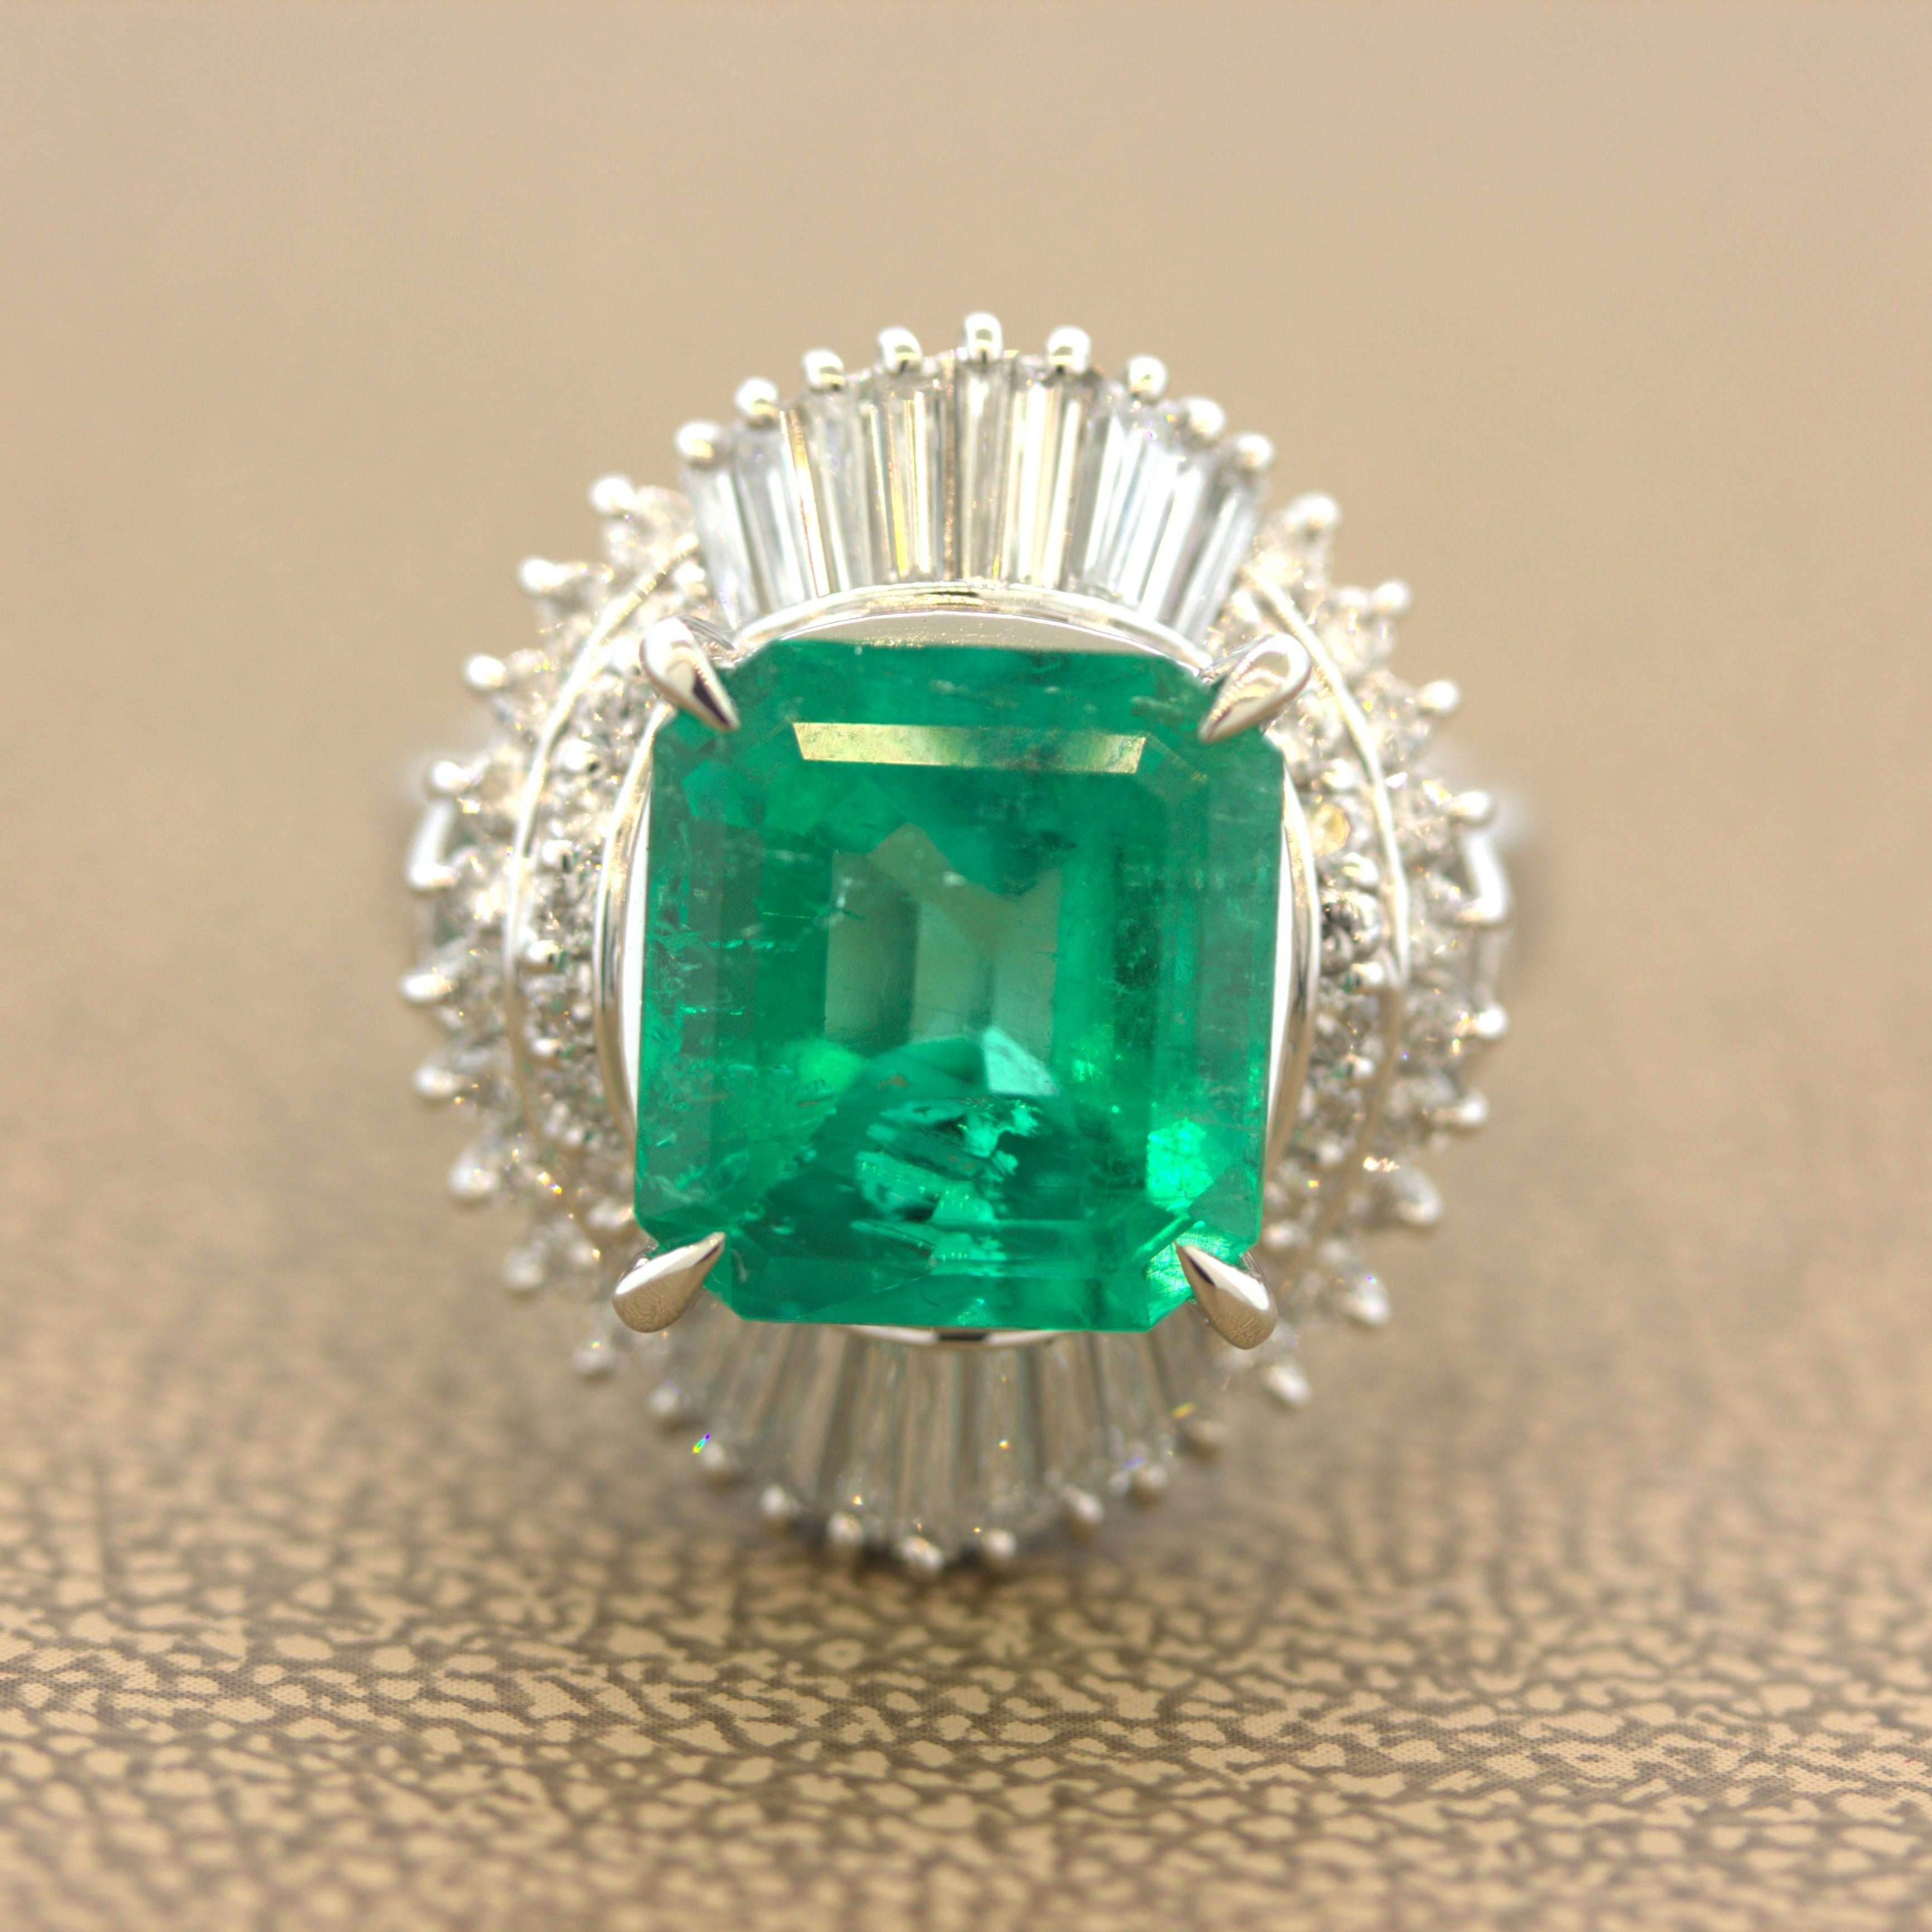 A richly colored gem emerald weighing 5.23 carats takes center stage. Due to its strong color and internal features we strongly believe this stone is from Colombia. It has a rich green color while still maintaining a bright and lively crystal. It is